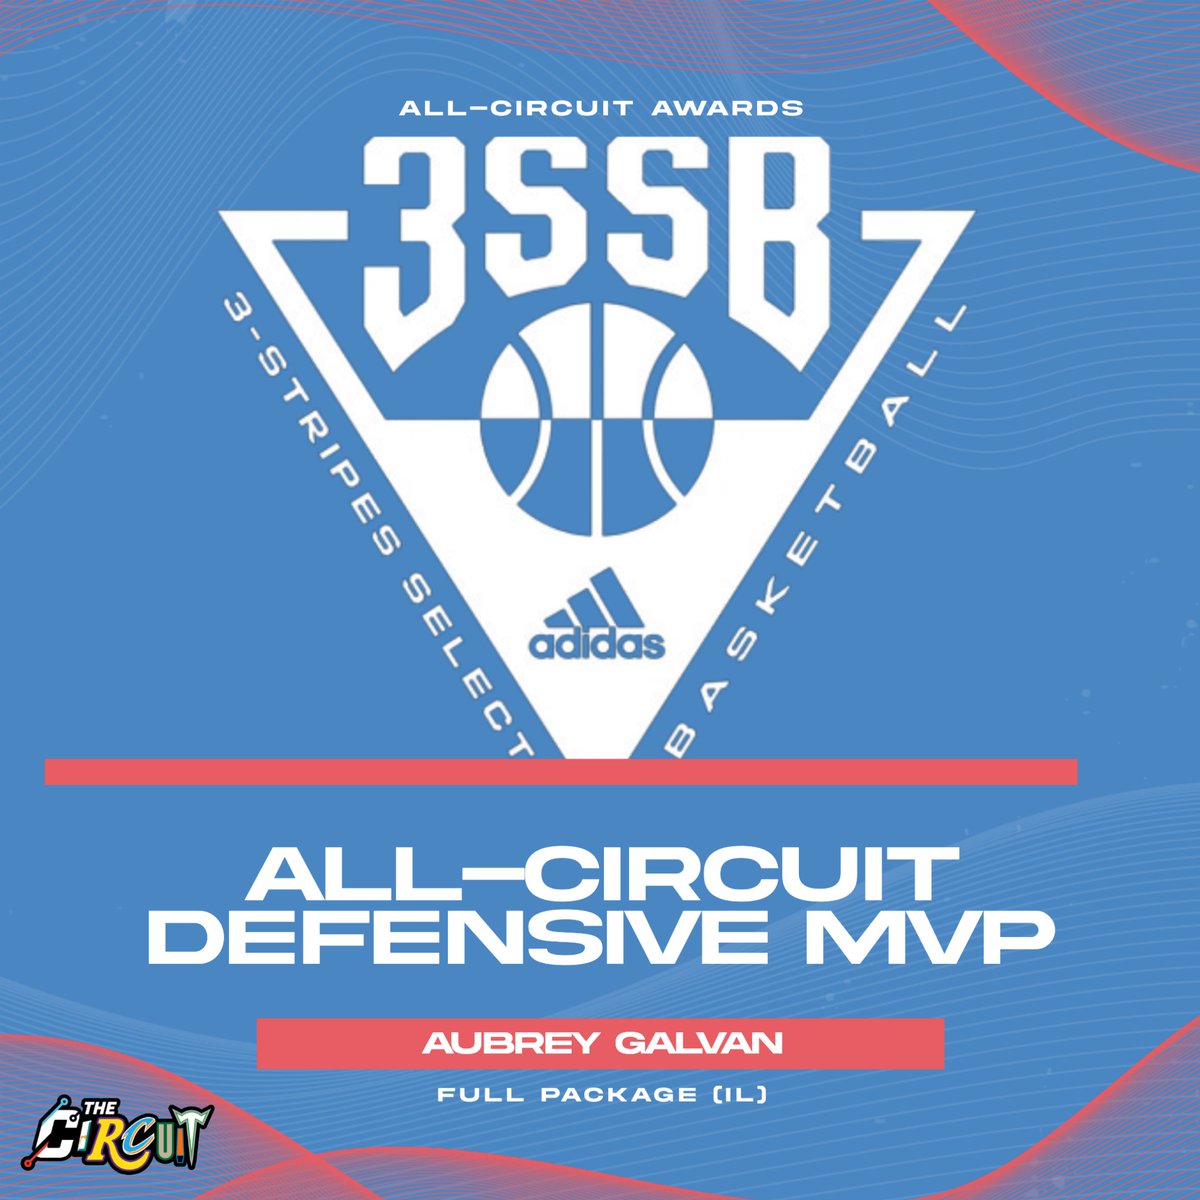 adidas 3SSB Session I | Defensive MVP 🛑 Aubrey Galvan | Full Package (IL) | 2025 Averages ➡️ 2.8 SPG, 1.8 BPG, 3.5 RPG, 18.5 PPG, 4.3 APG All-Circuit Awards ⤵️ thecircuithoops.com/news_article/s…